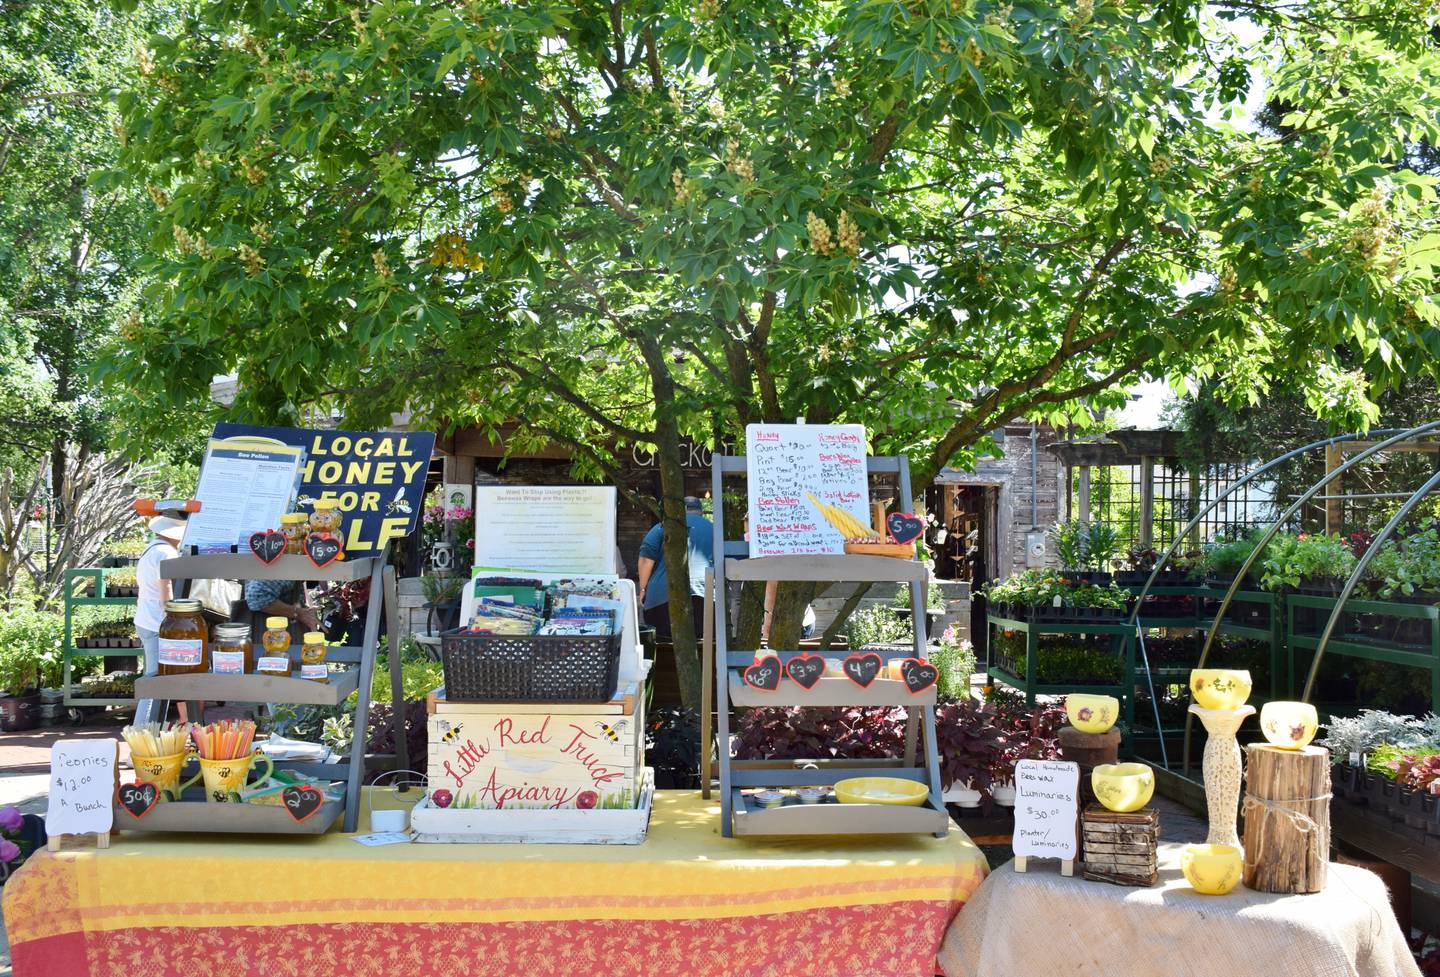 Sycamore’s farmers market is held at Blumen Gardens, 403 Edward St. in Sycamore, 3 to 7 p.m. Tuesdays June 1 through July 27 and 3 to 6 p.m.  Each week, there will be between 10 to 13 vendors.